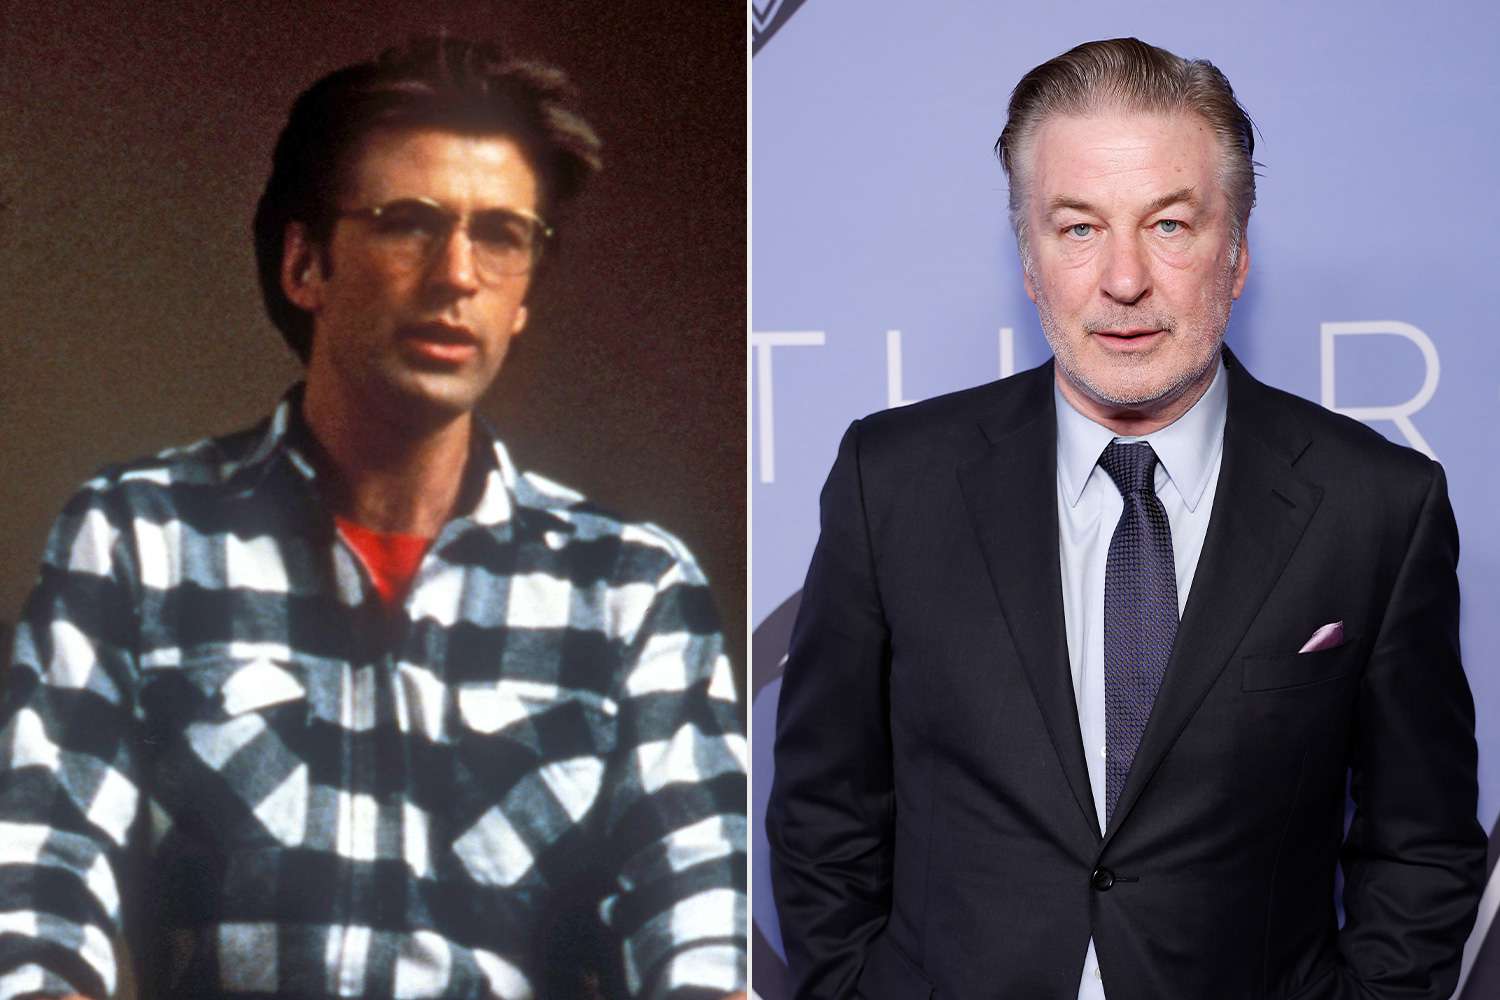 How Alec Baldwin’s Life Has Changed Since Starring in “Beetlejuice”, as He Prepares for Manslaughter Trial